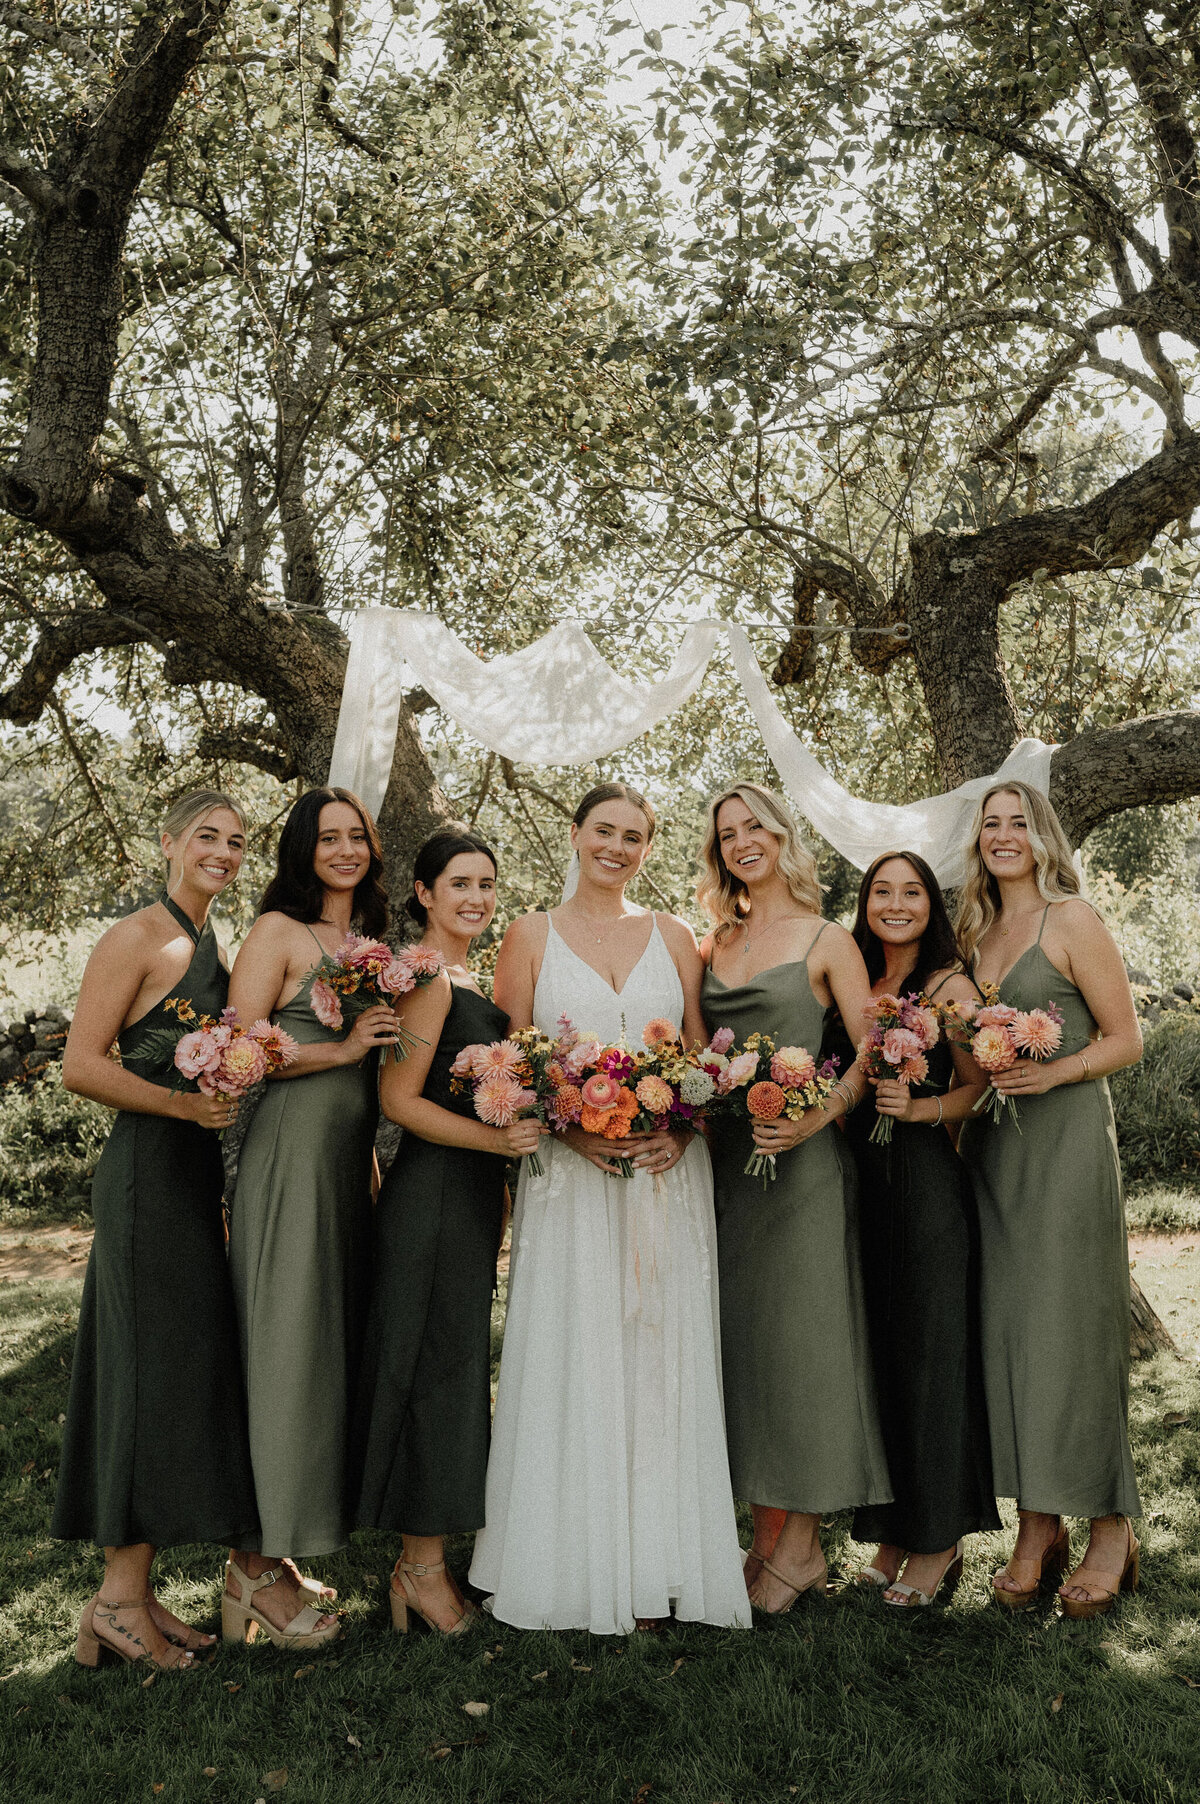 Bride and bridesmaids smiling with bouquets